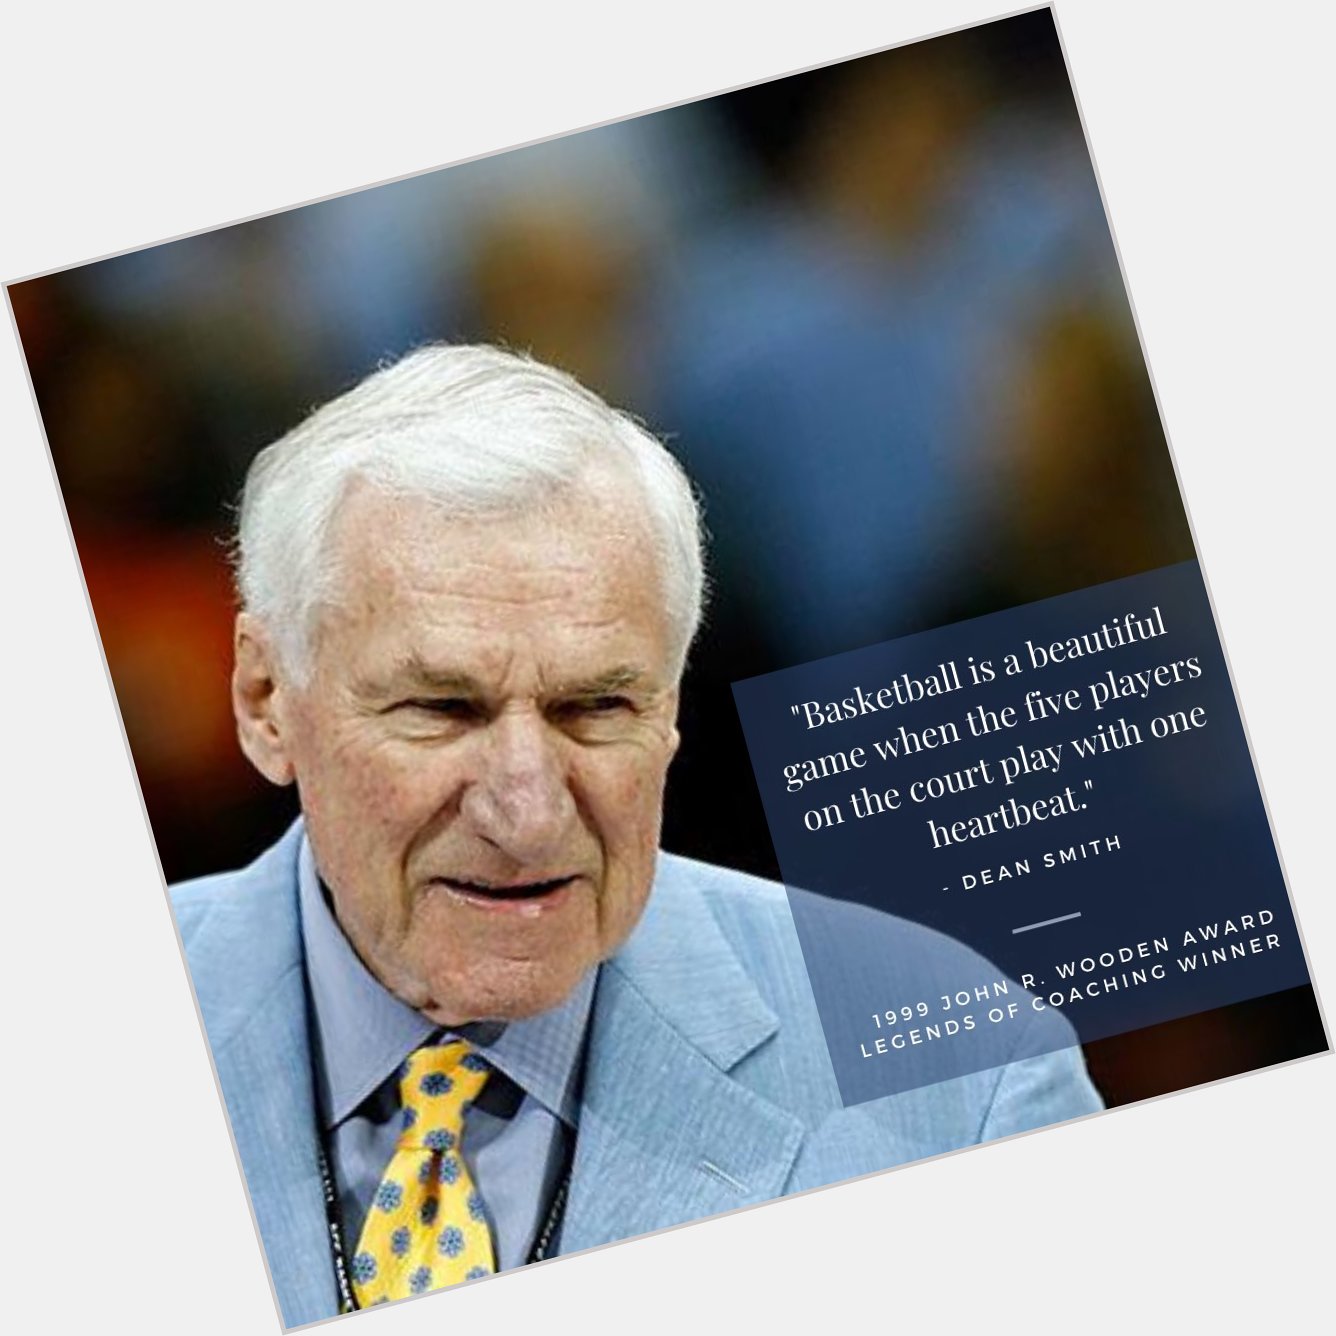 Happy birthday to our inaugural 1999 Legends of Coaching Winner, Dean Smith of 